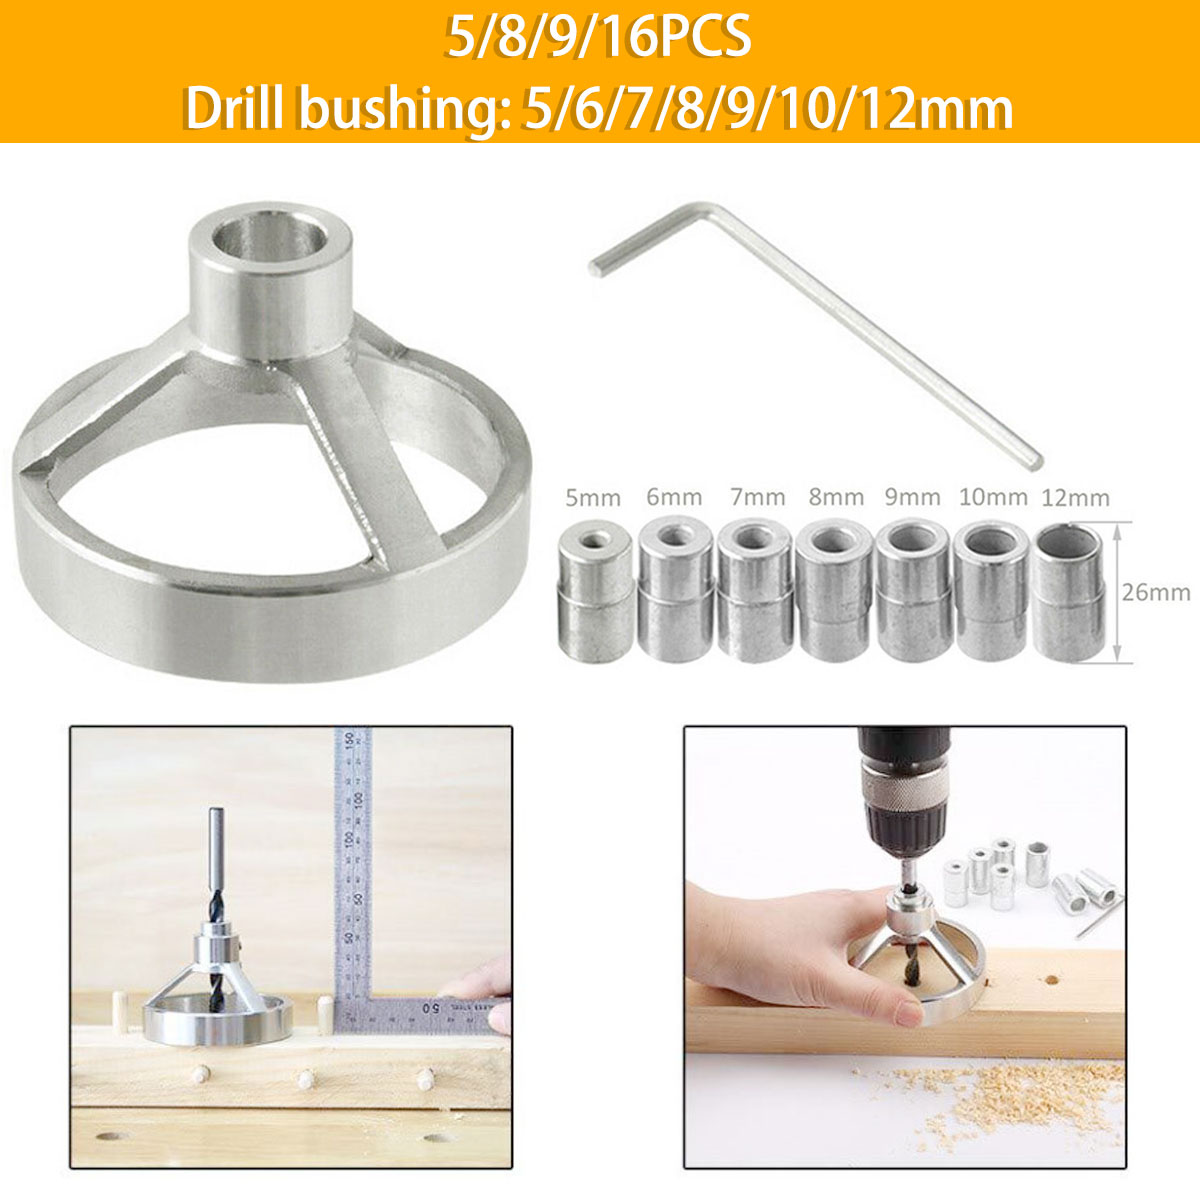 Jig-Drill-Vertical-Fixed-Fixture-Woodworking-Puncher-Locator-Guide-Doweling-1768748-1